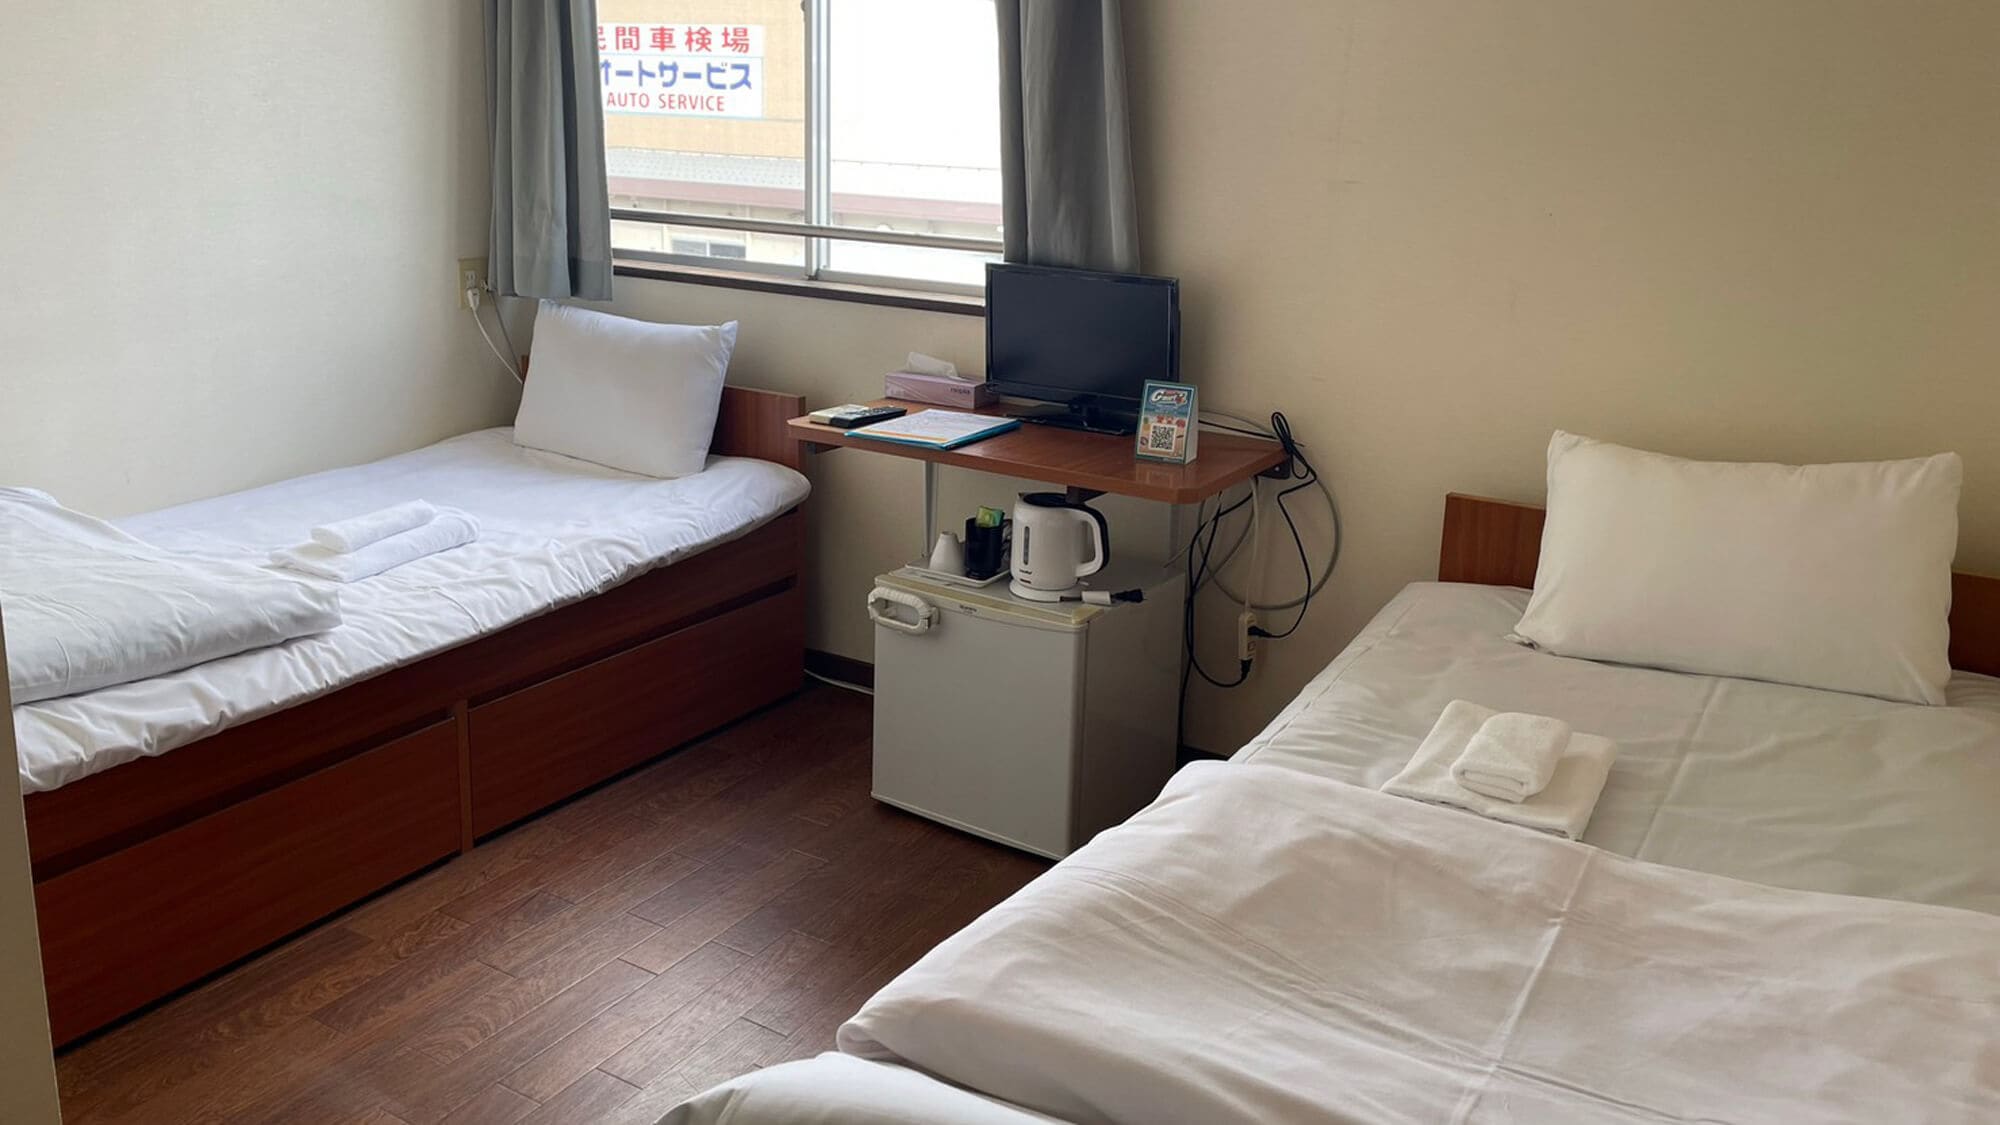 ◆ Twin room: 13 square meters with bath & toilet, air conditioner, TV, refrigerator